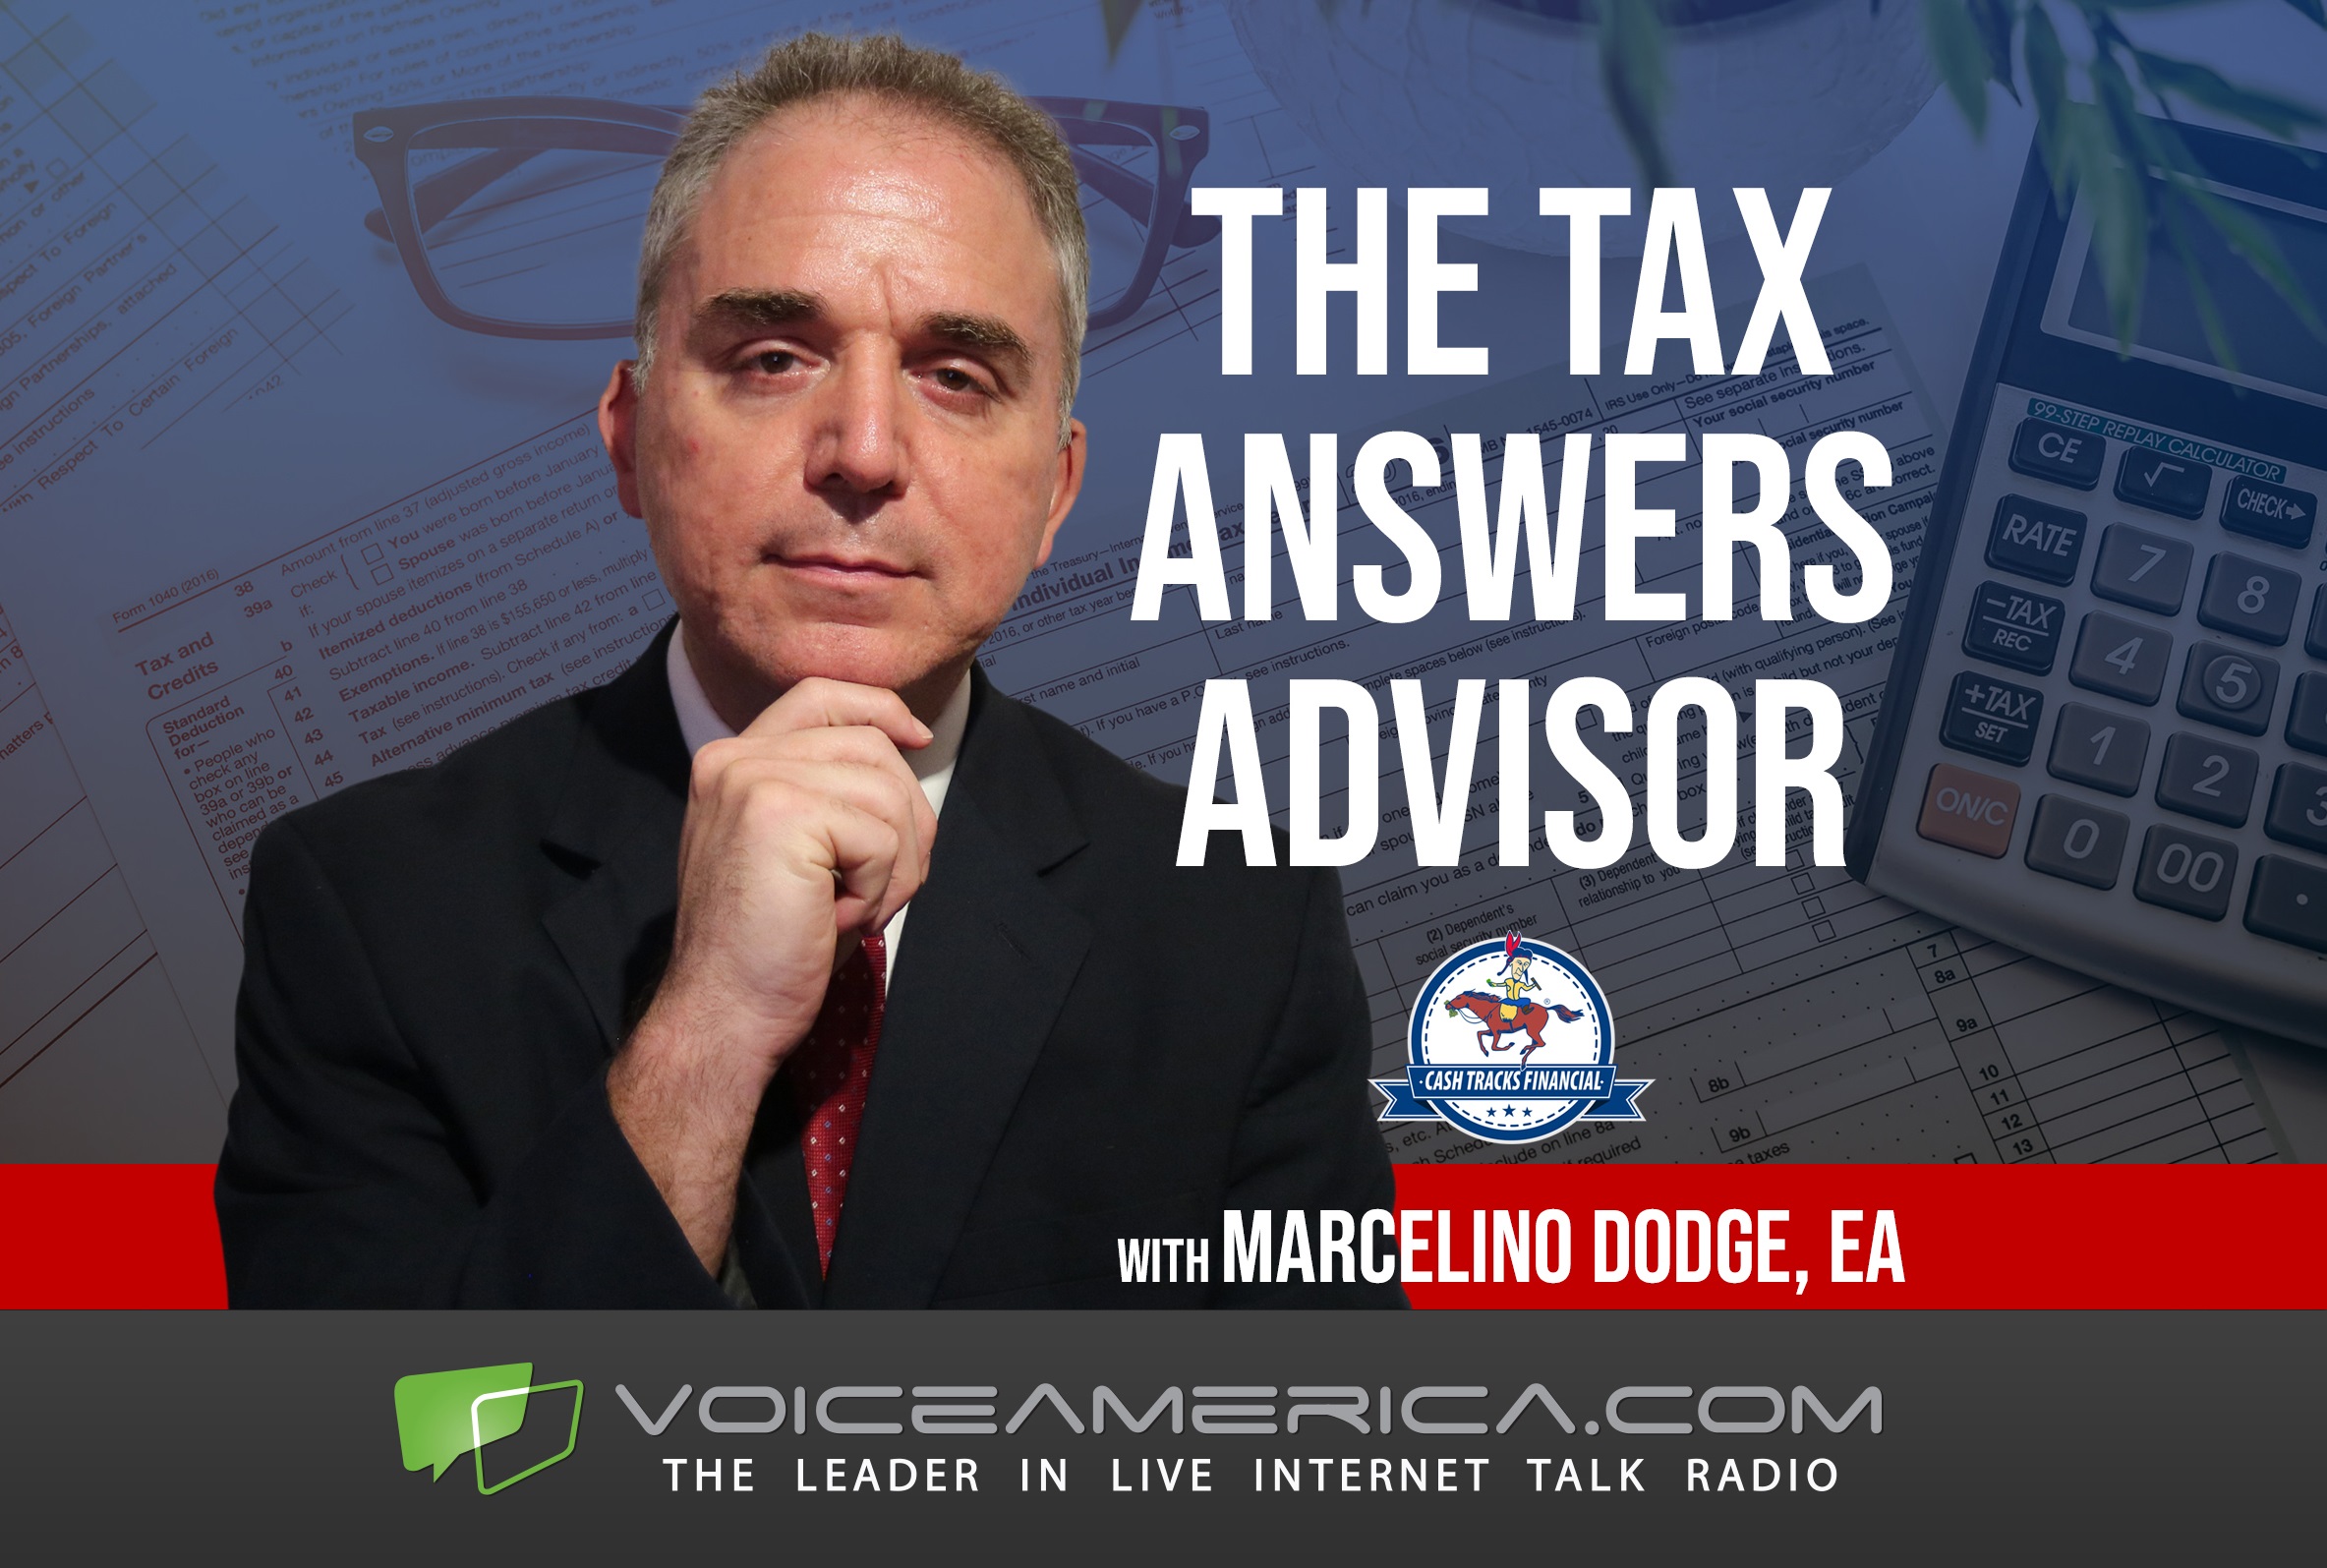 IRS Collections & Enforcement-How to Solve Unpaid Tax Issues!